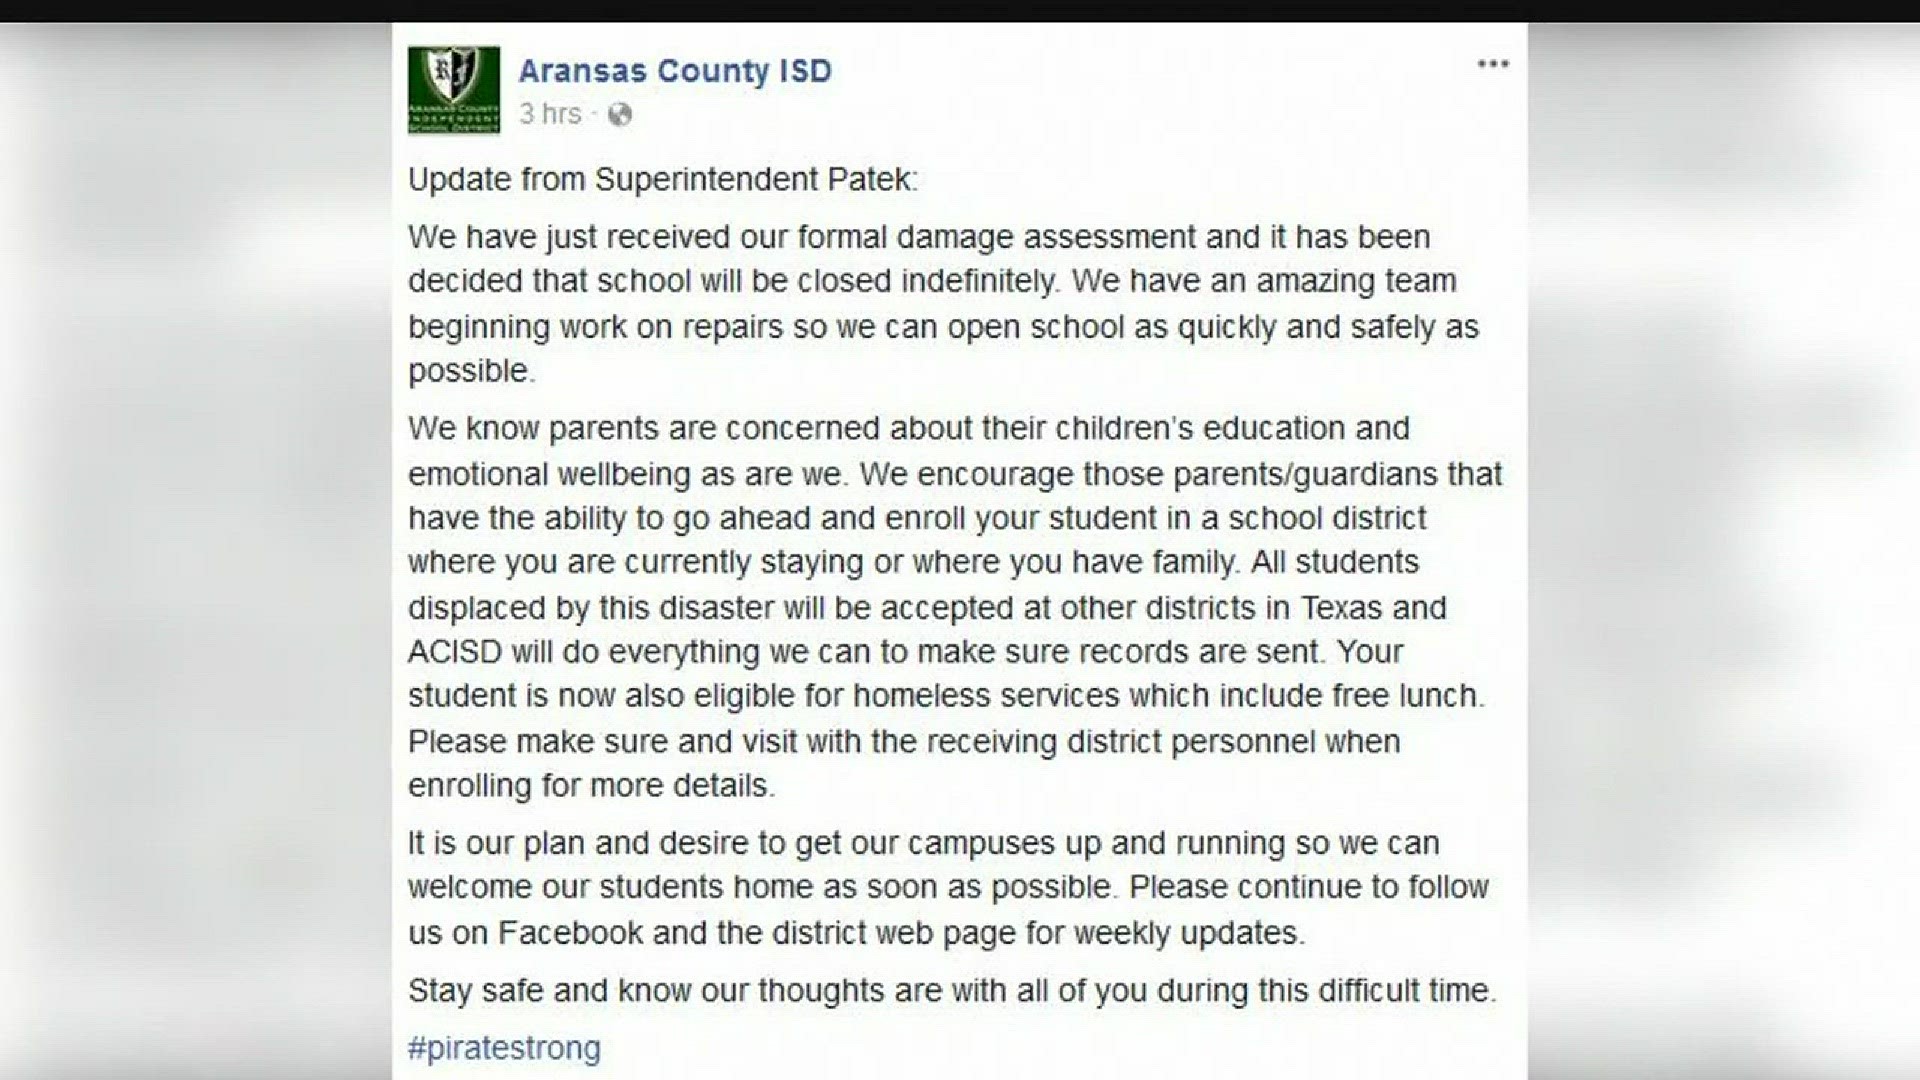 After a formal damage assessment to the Aransas County Independent School District, it has been decided that the district will close indefinitely.